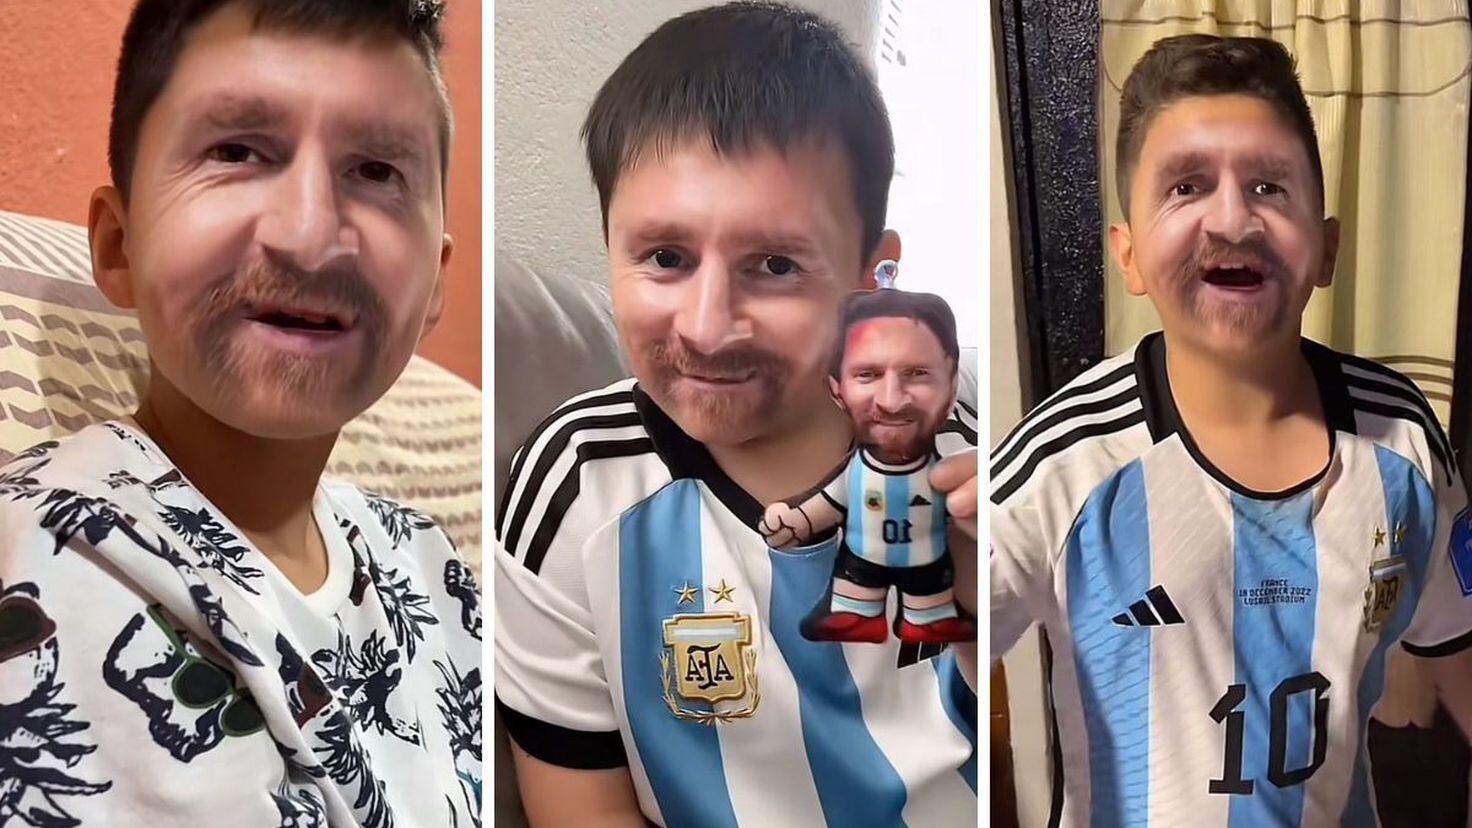 How to use Lionel Messi filter on TikTok?